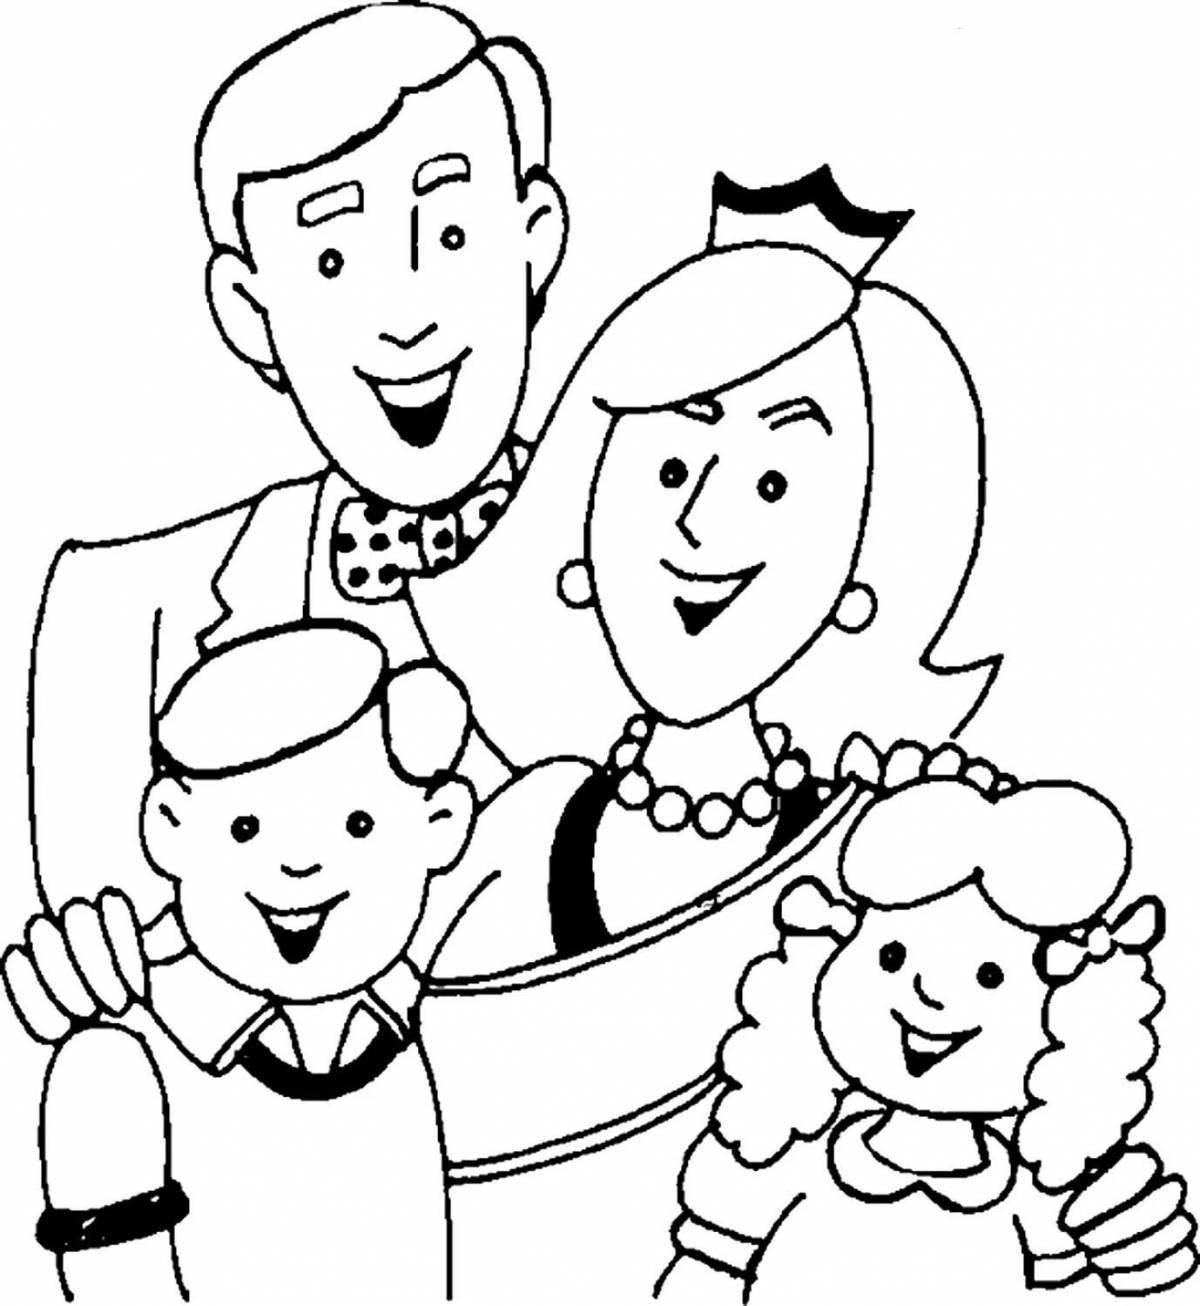 Shine my family coloring page